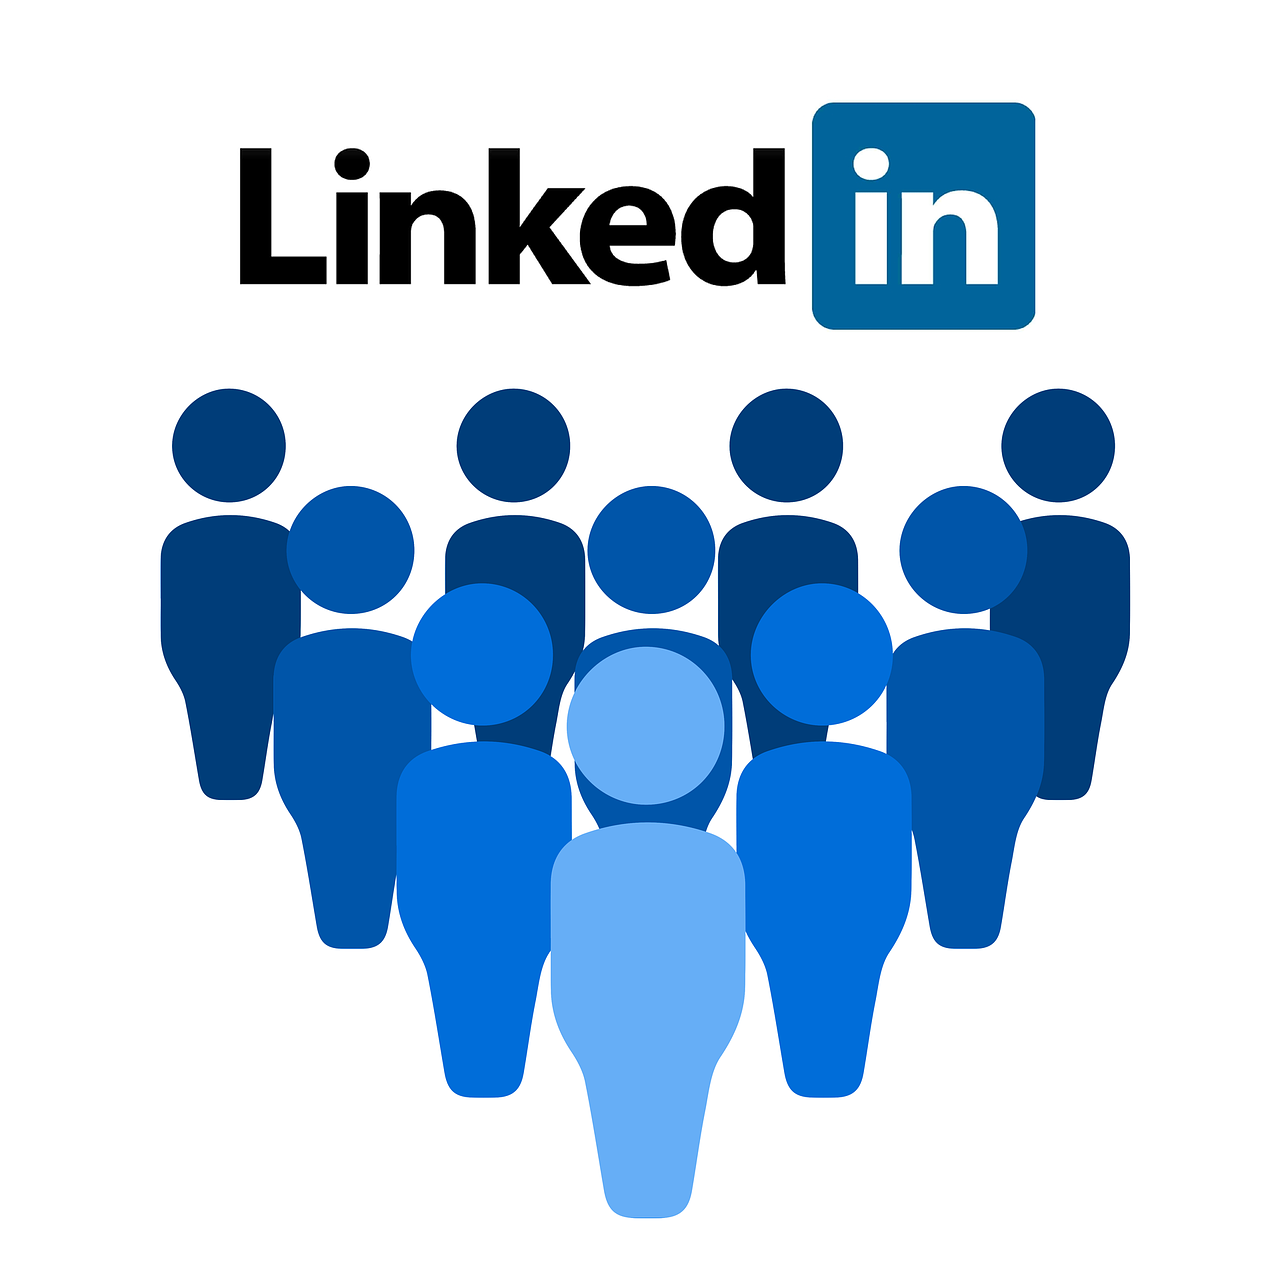 The LinkedIn logo above a group of blue people icons .jpg